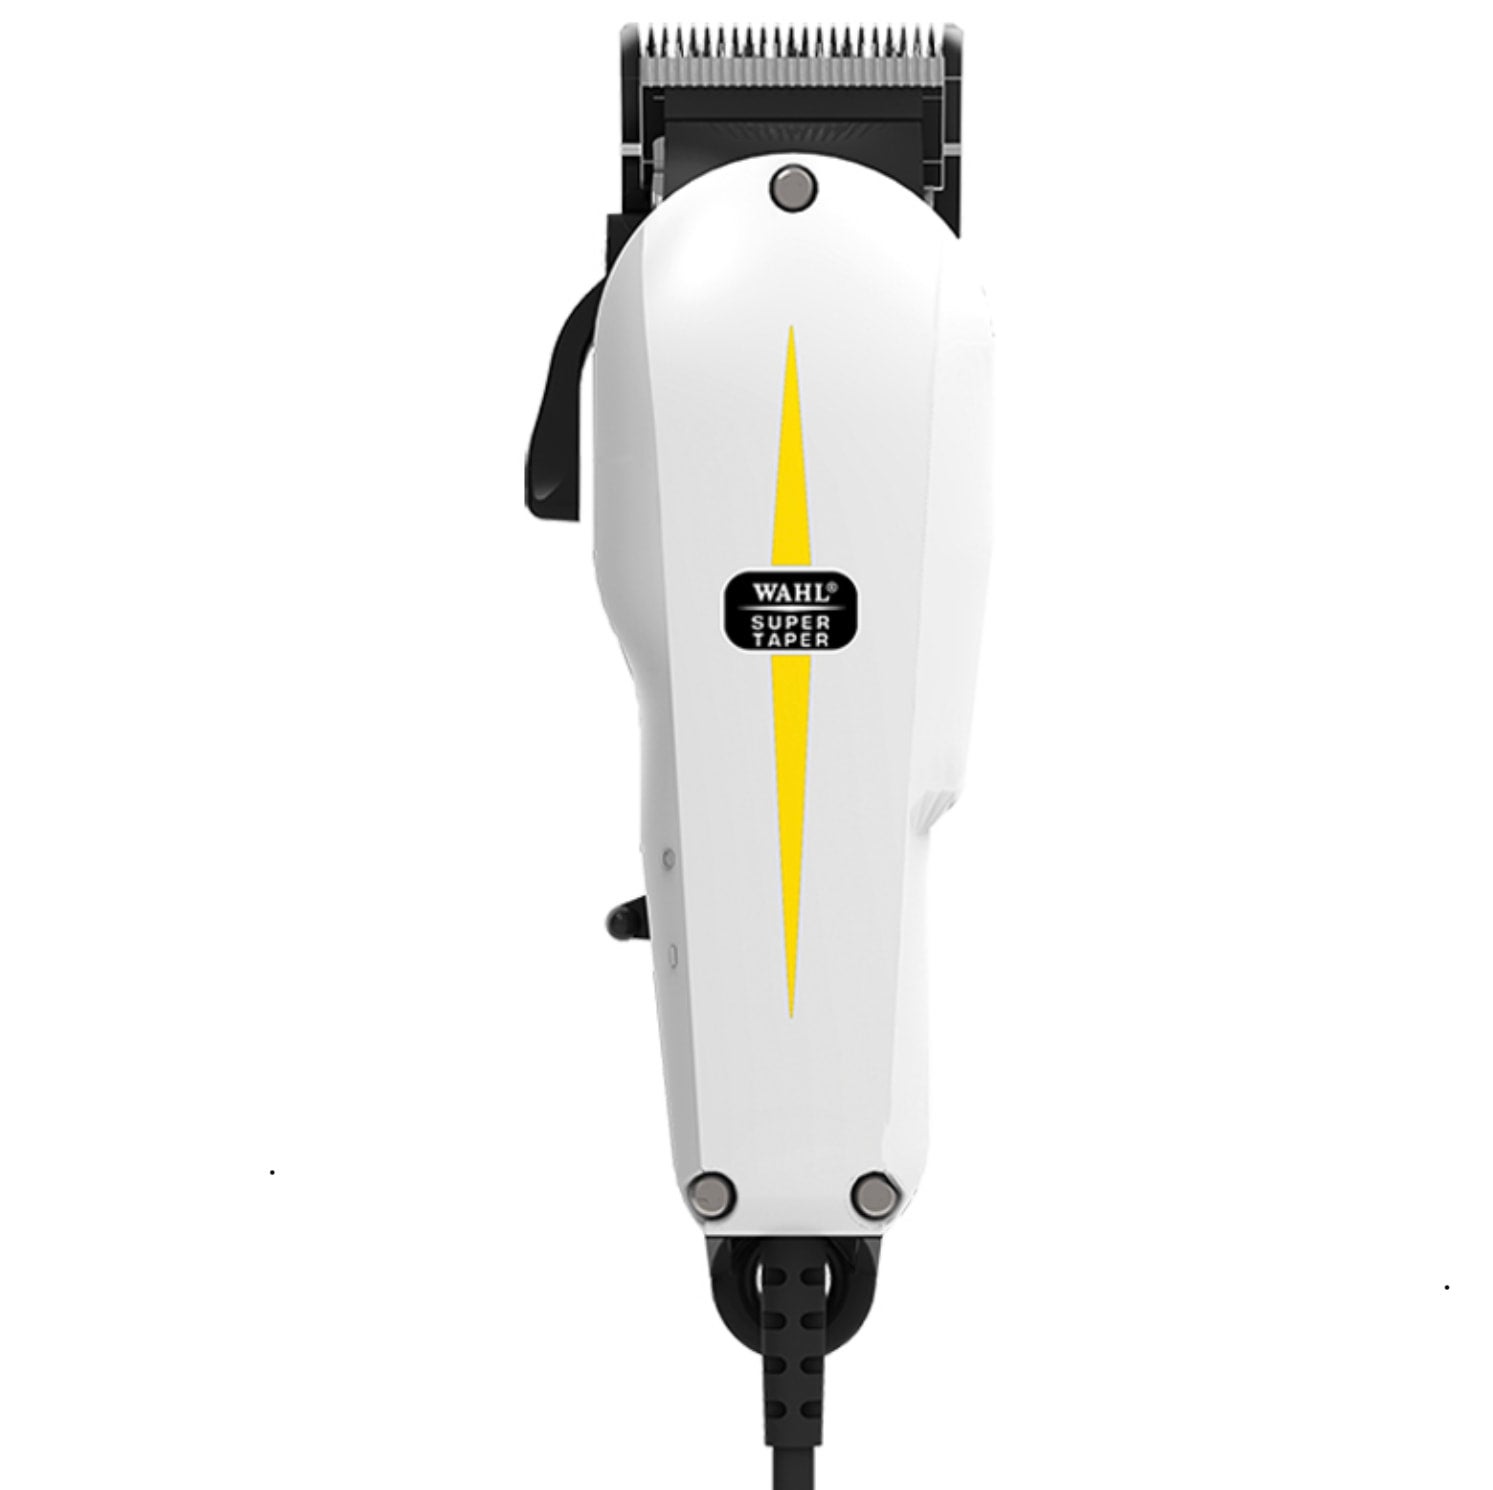  Wahl Professional Super Taper Hair Clipper with Full